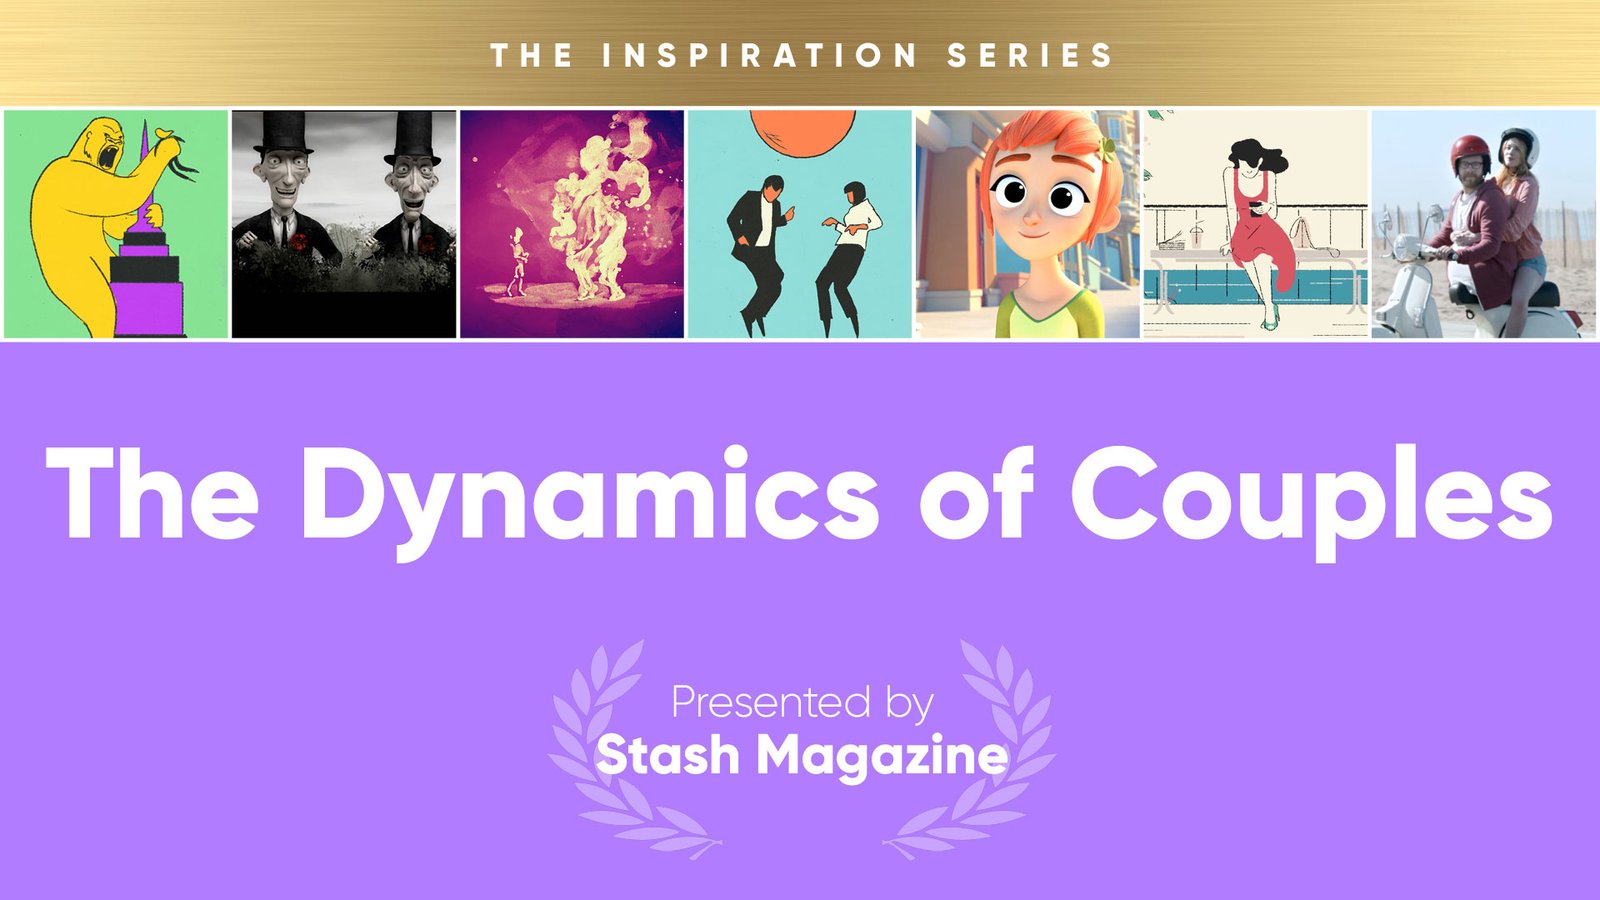 The Inspiration Series: The Dynamics of Couples